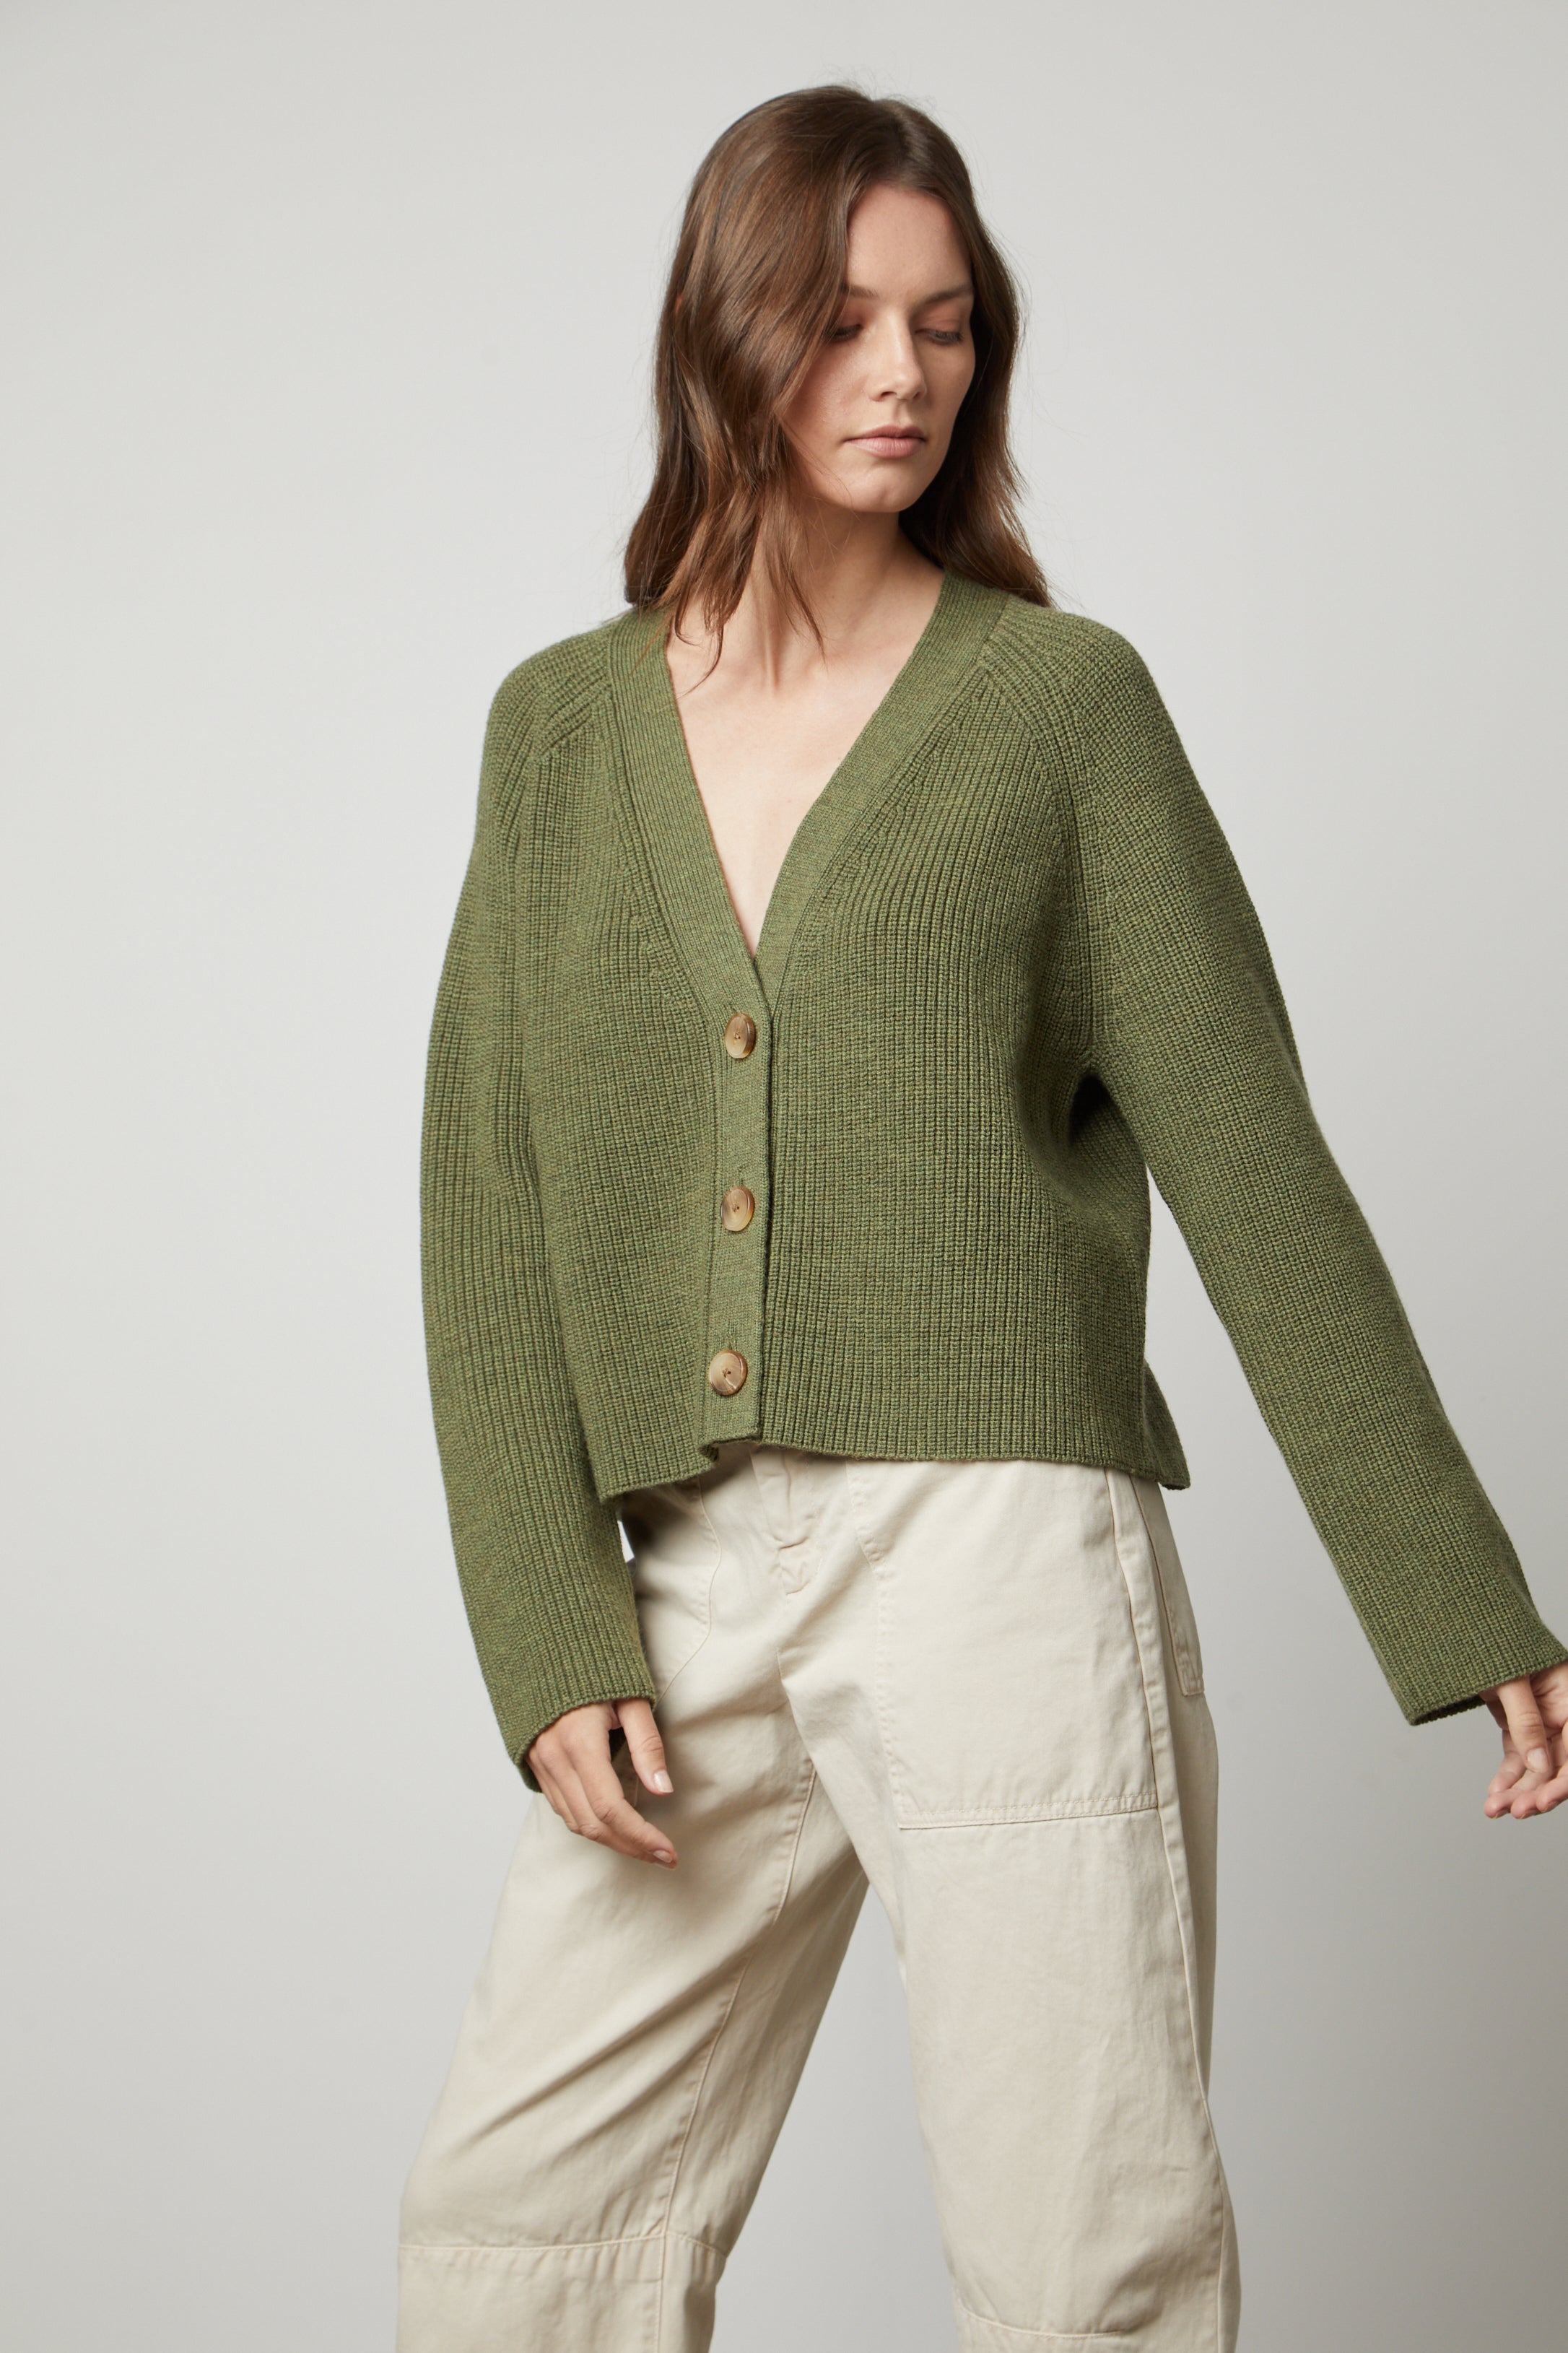   The model is wearing a green MARILYN BUTTON FRONT CARDIGAN made by Velvet by Graham & Spencer for warmth and comfort. 